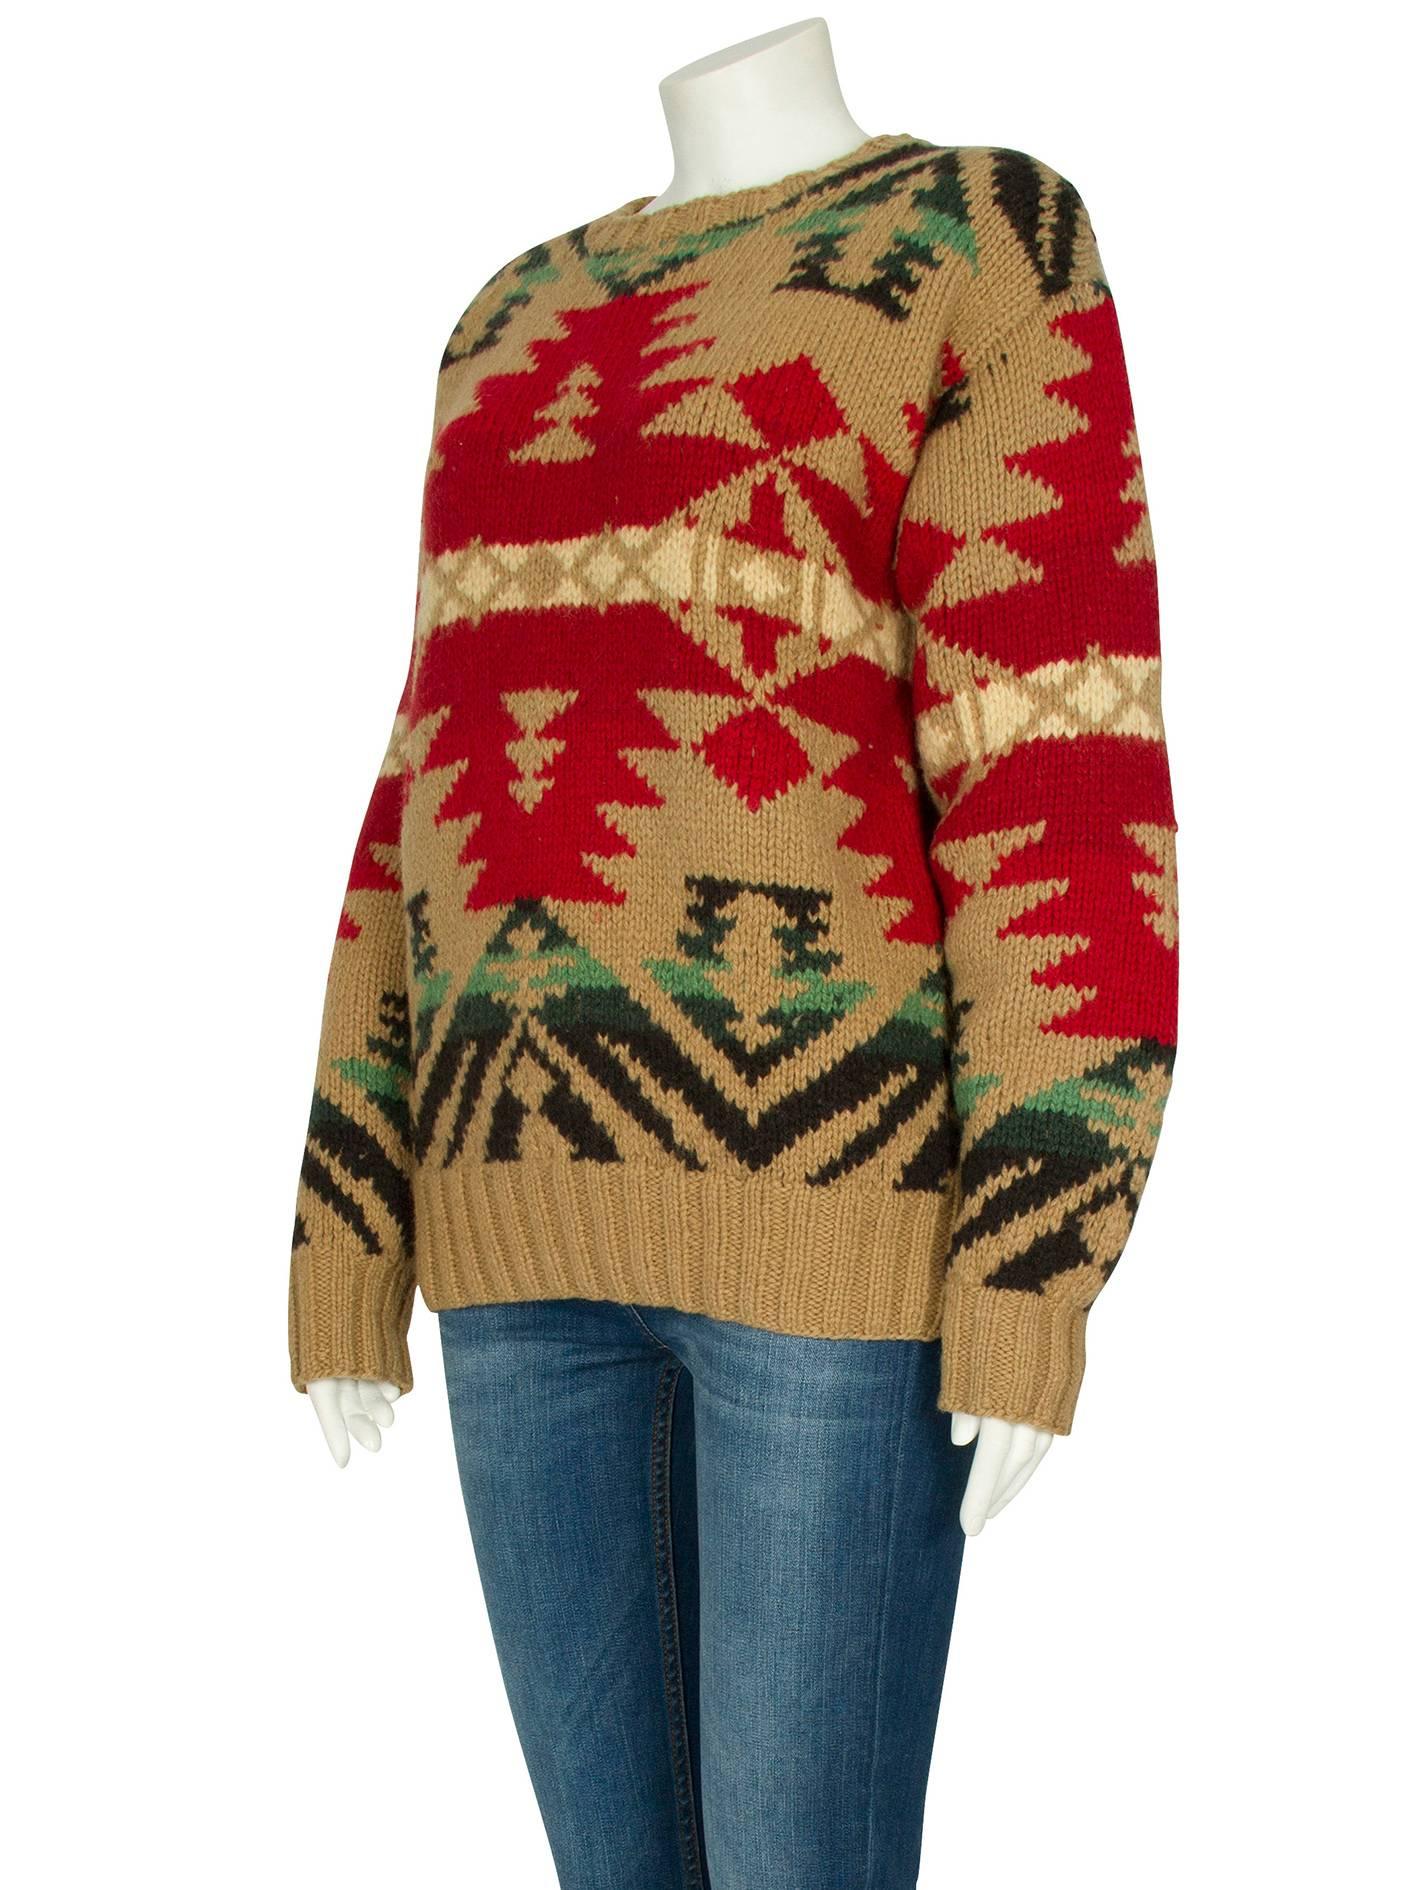 A Ralph Lauren beige wool jumper with a red, green and black Aztec pattern from the label’s 1988 collection. The chunky knit long-sleeved jumper features a round neckline, a ribbed trim and fitted ribbed cuffs. The jumper has a boxy shape and